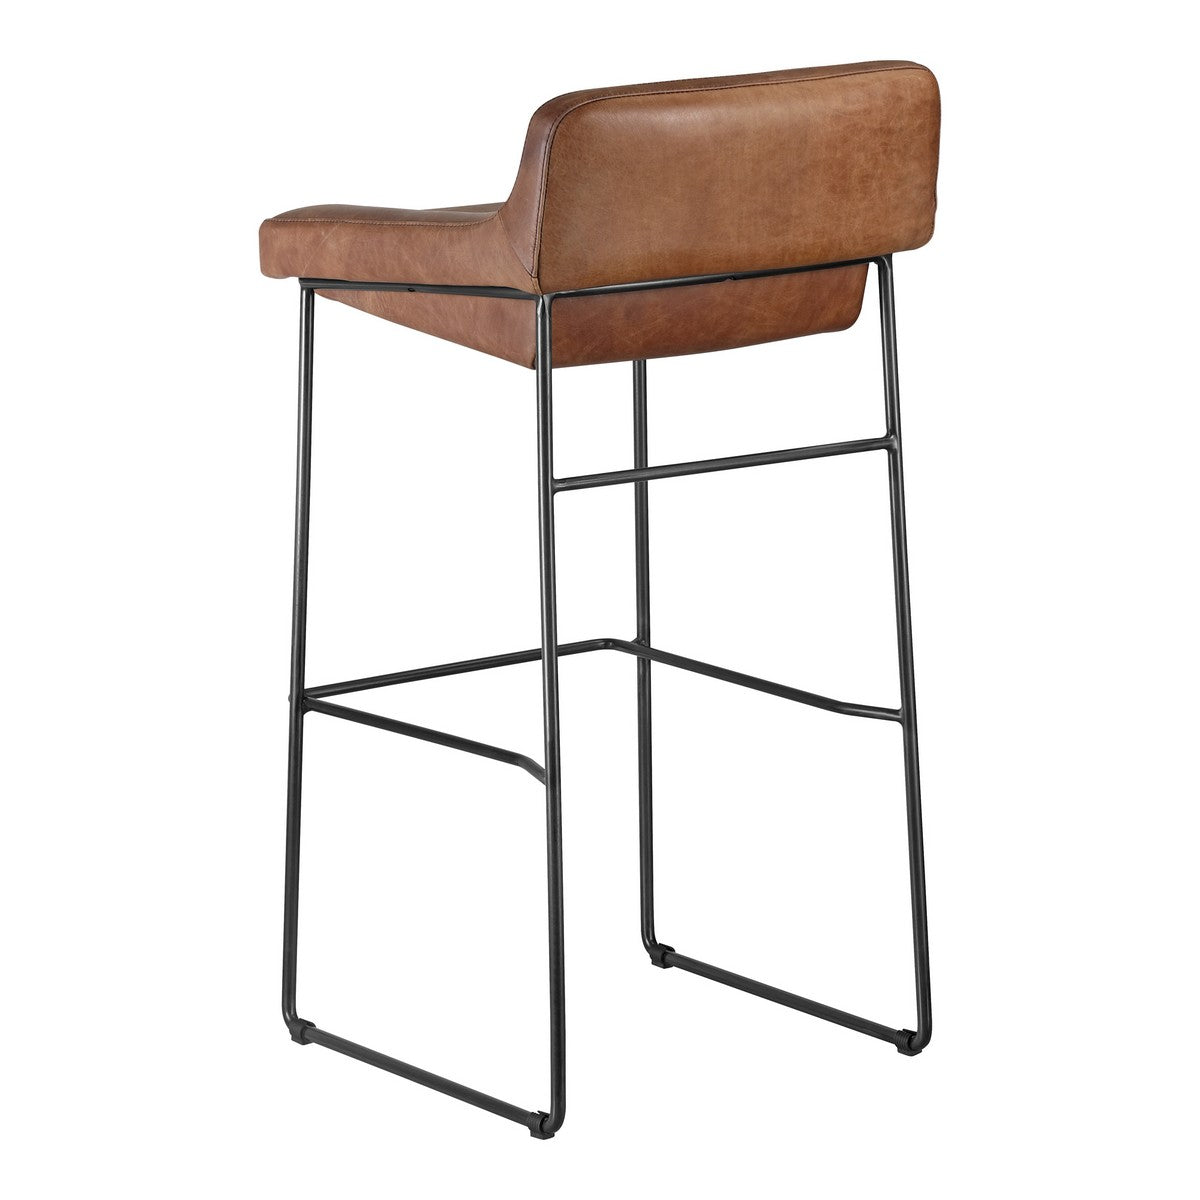 Moe's Home Collection Starlet Barstool Cappuccino-Set of Two - PK-1107-14